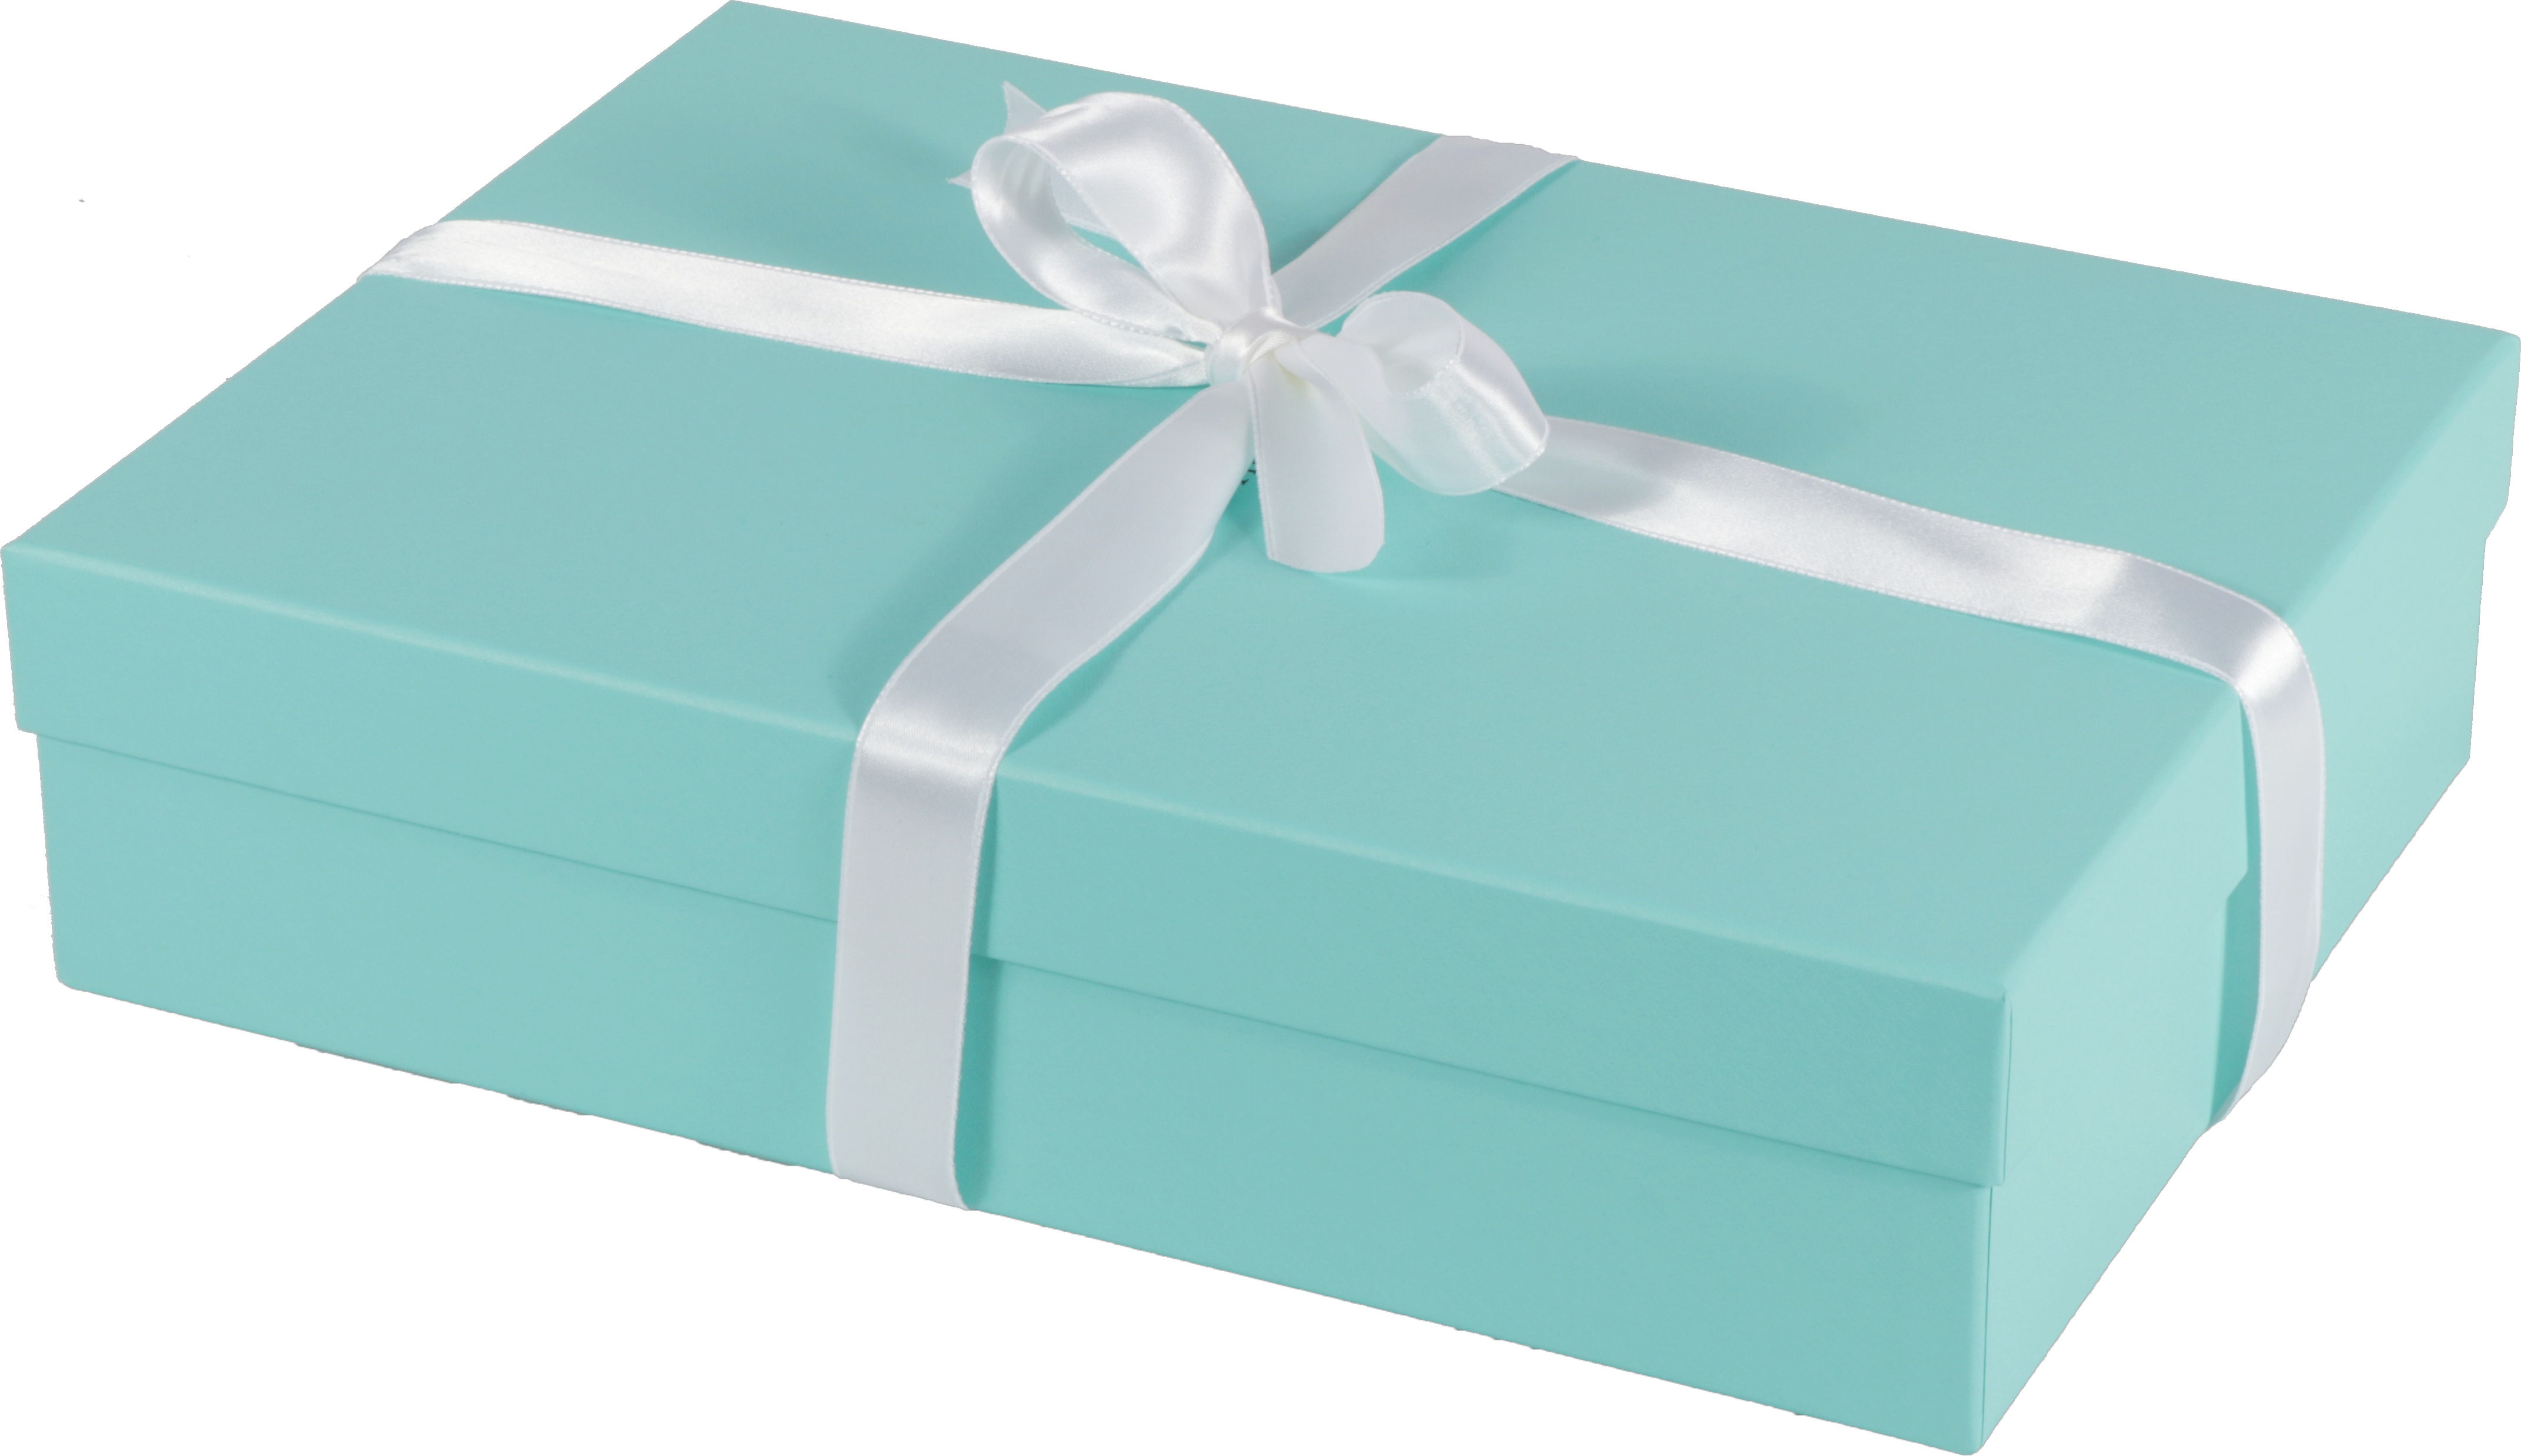 How the Tiffany's Box Redefined the Standard of Luxury Packaging